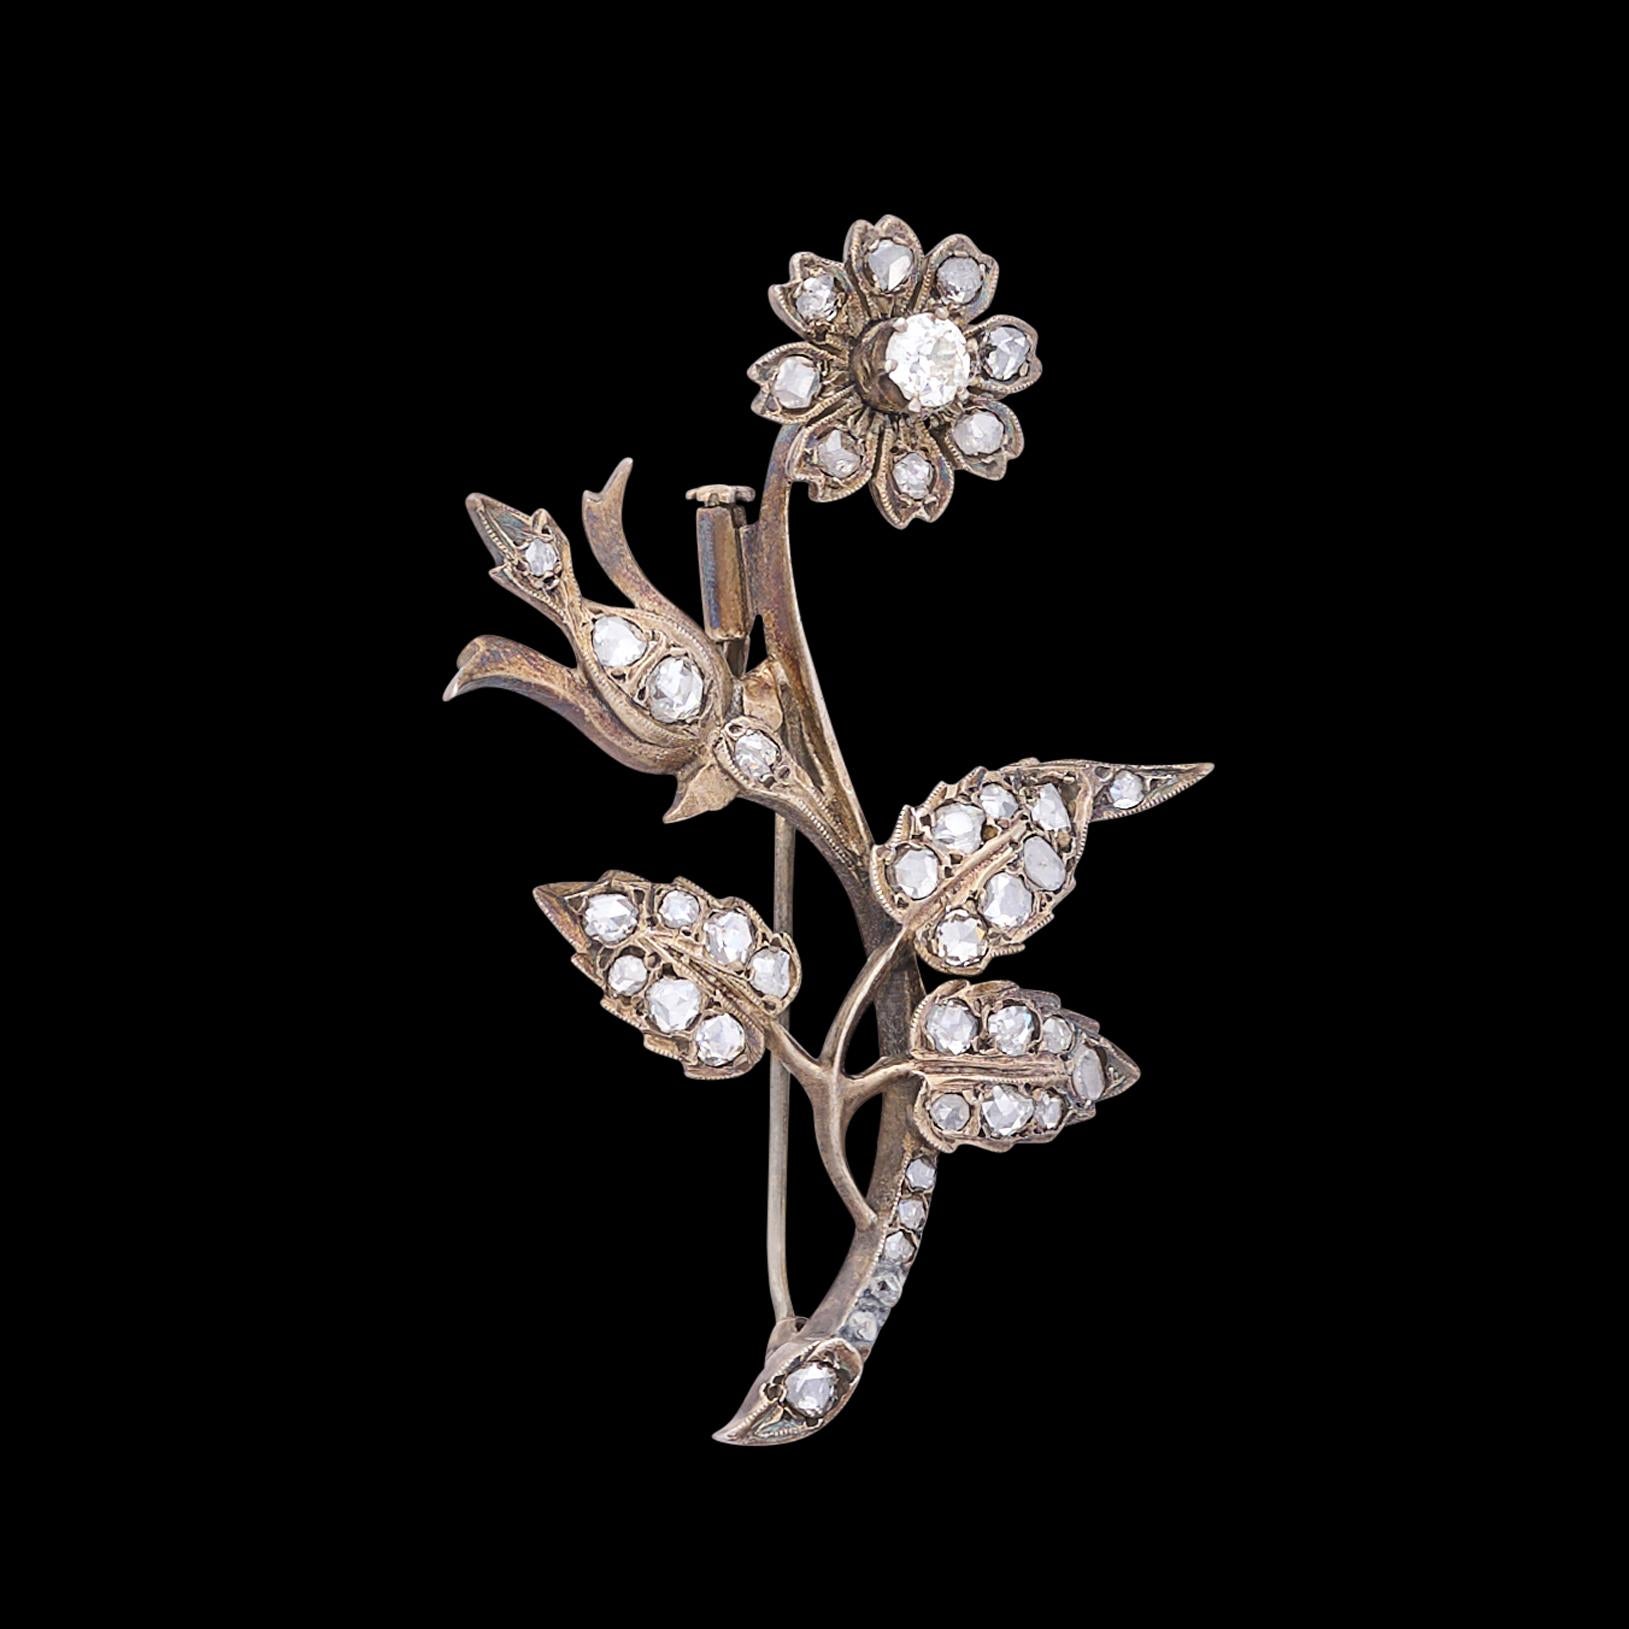 From the Victorian era, this charming French silver brooch is set with numerous rose and table-cut diamonds, with one European-cut diamond highlight, weighing in total an estimated 1.50 carats. The brooch measures 2 3/4 x 1 5/9 inches, and weighs